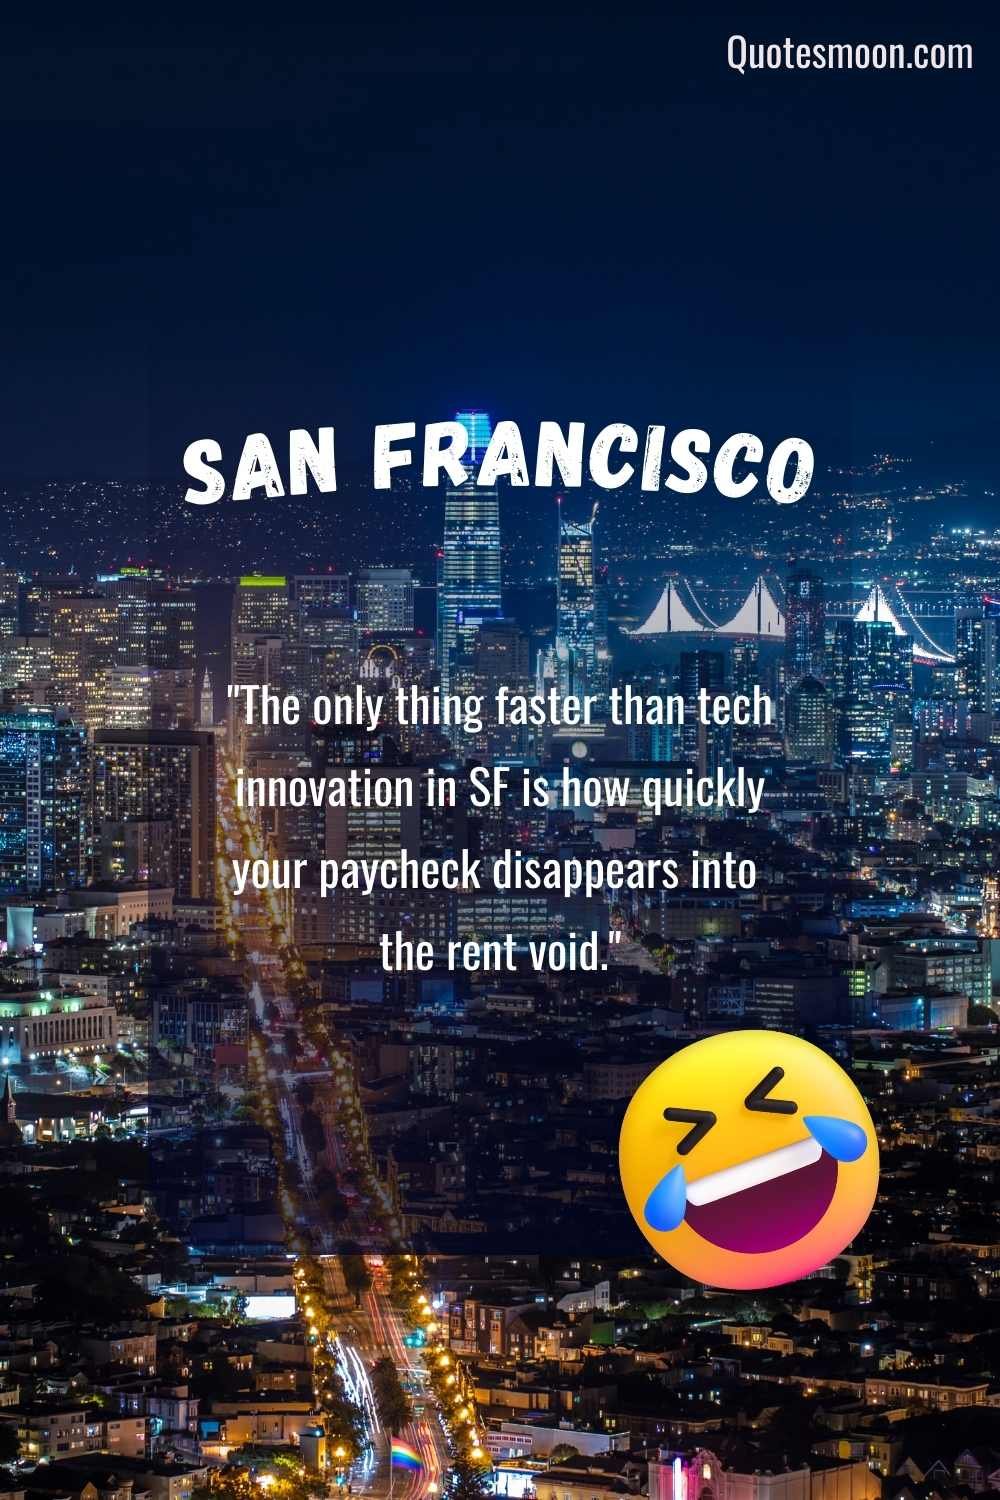 San Francisco Quotes That Can Be Used As Captions with pics HD